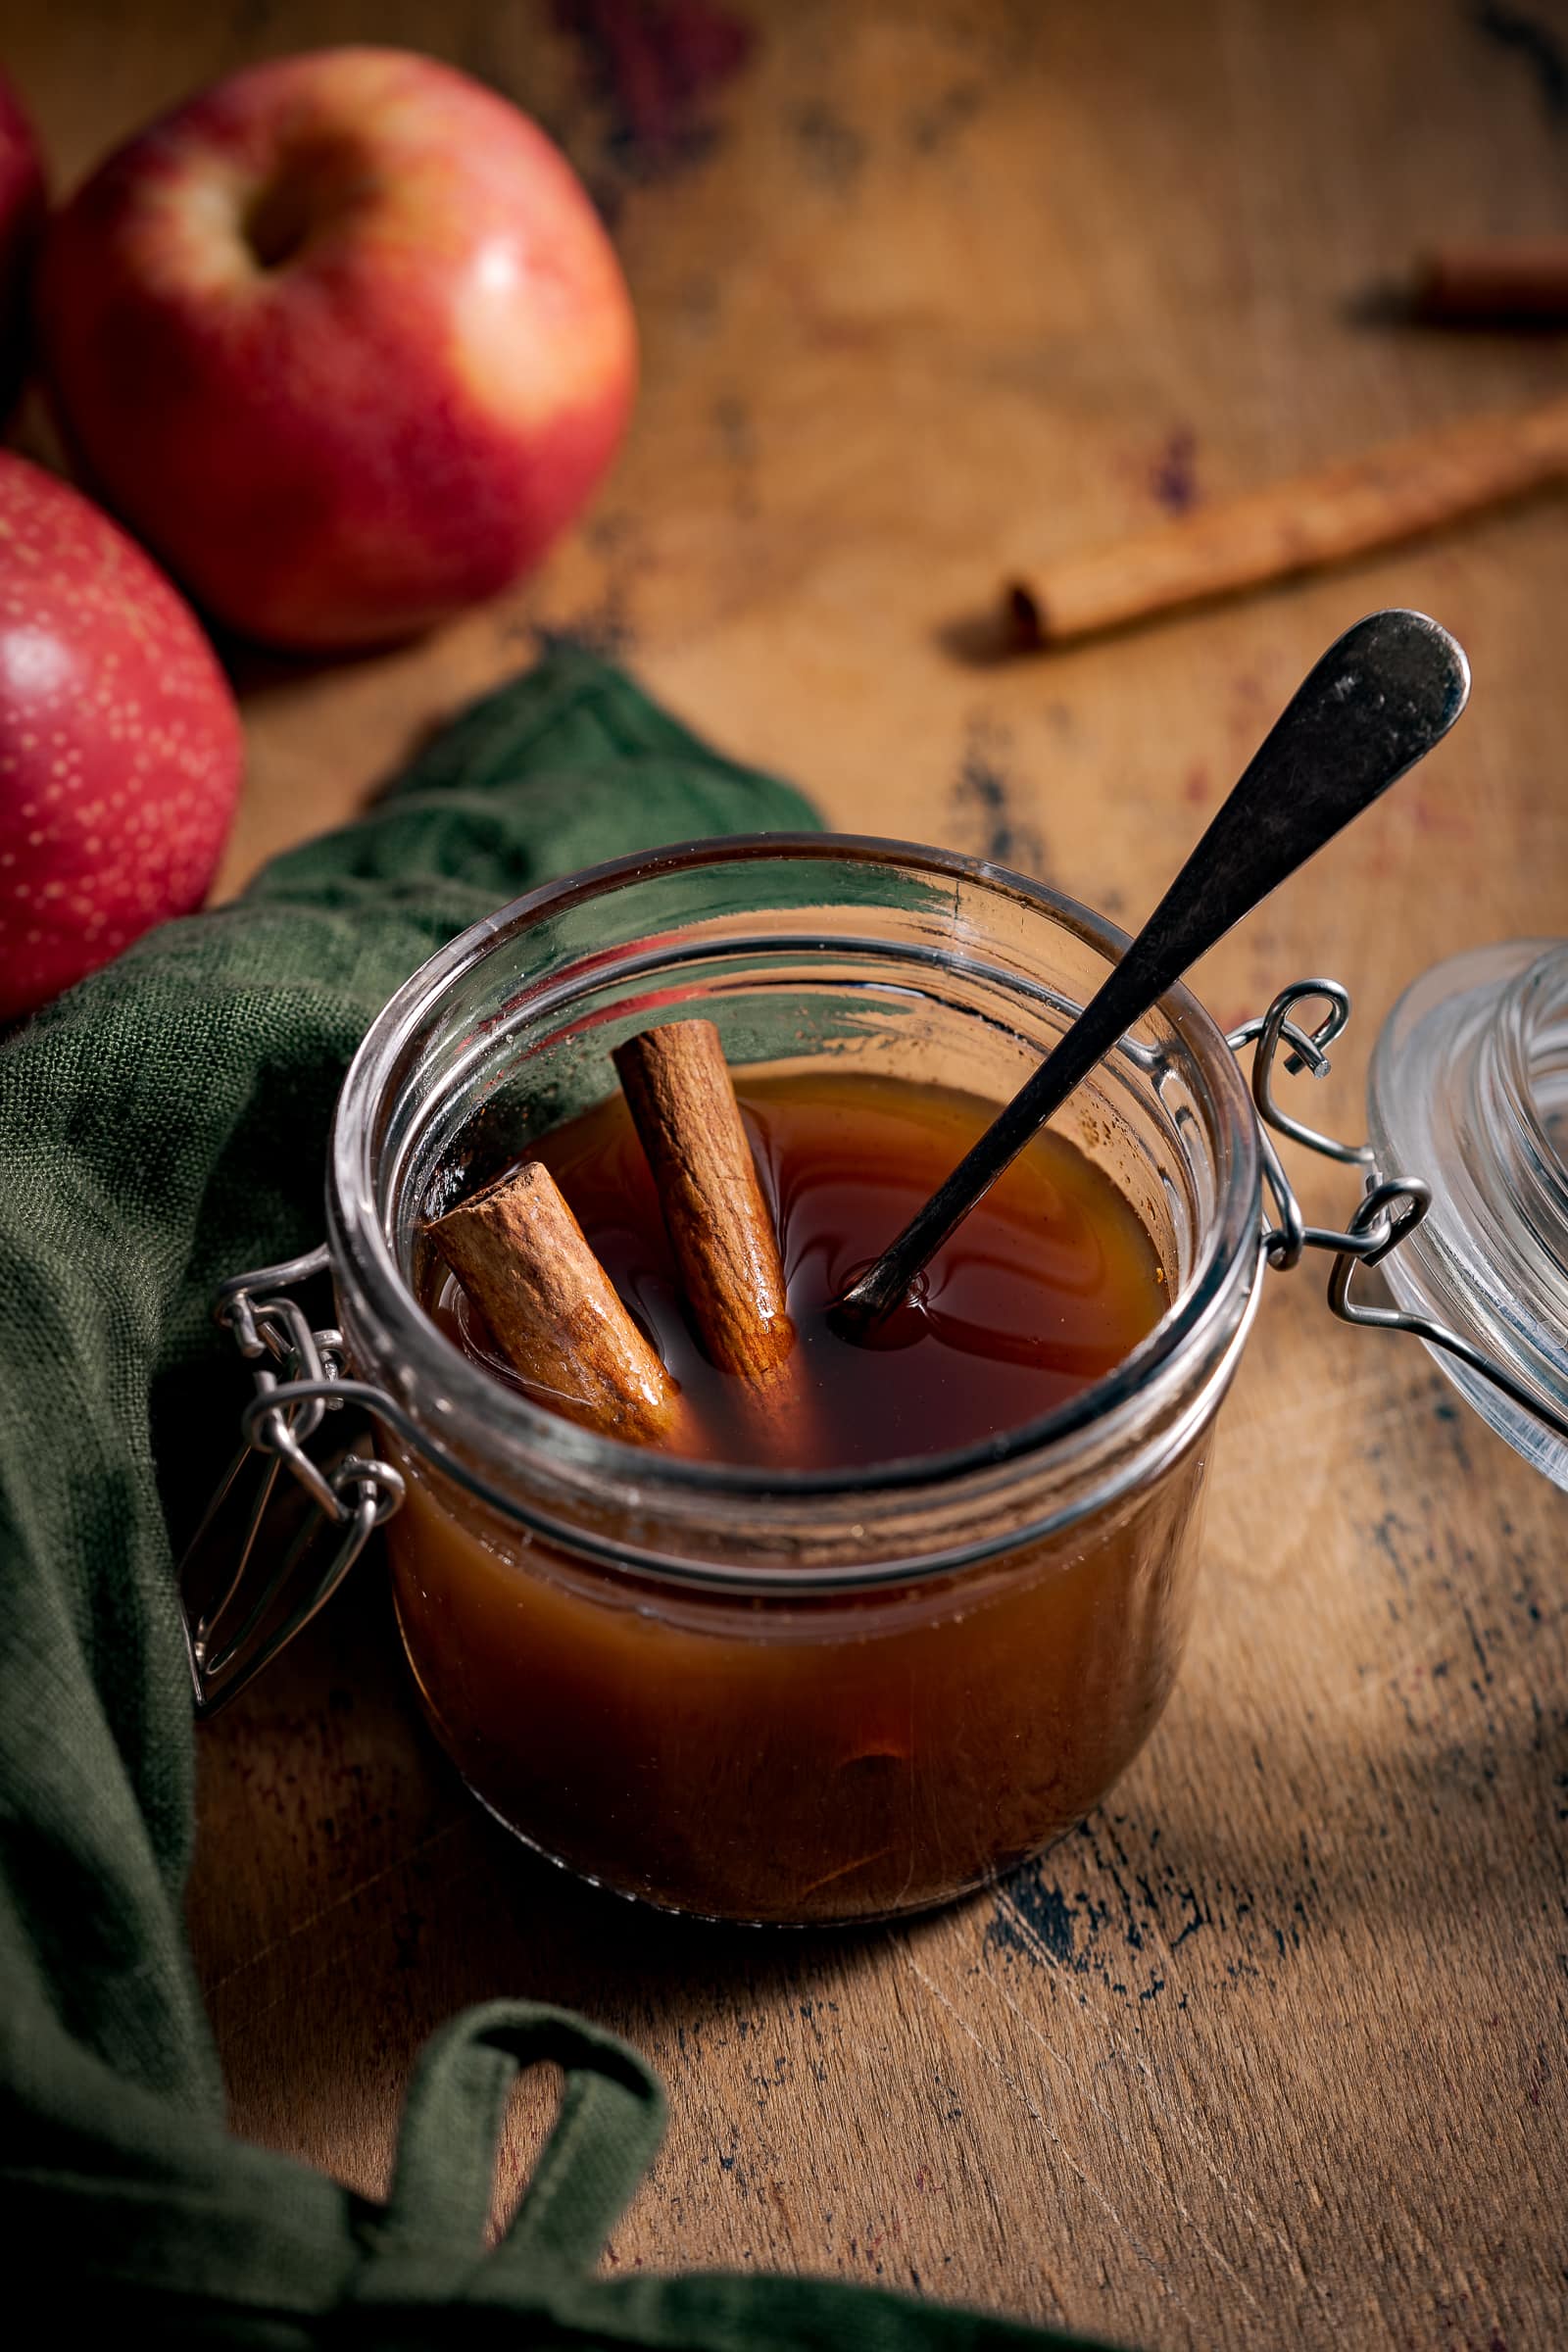 Apple syrup in a small jar with a spoon and cinnamon sticks.